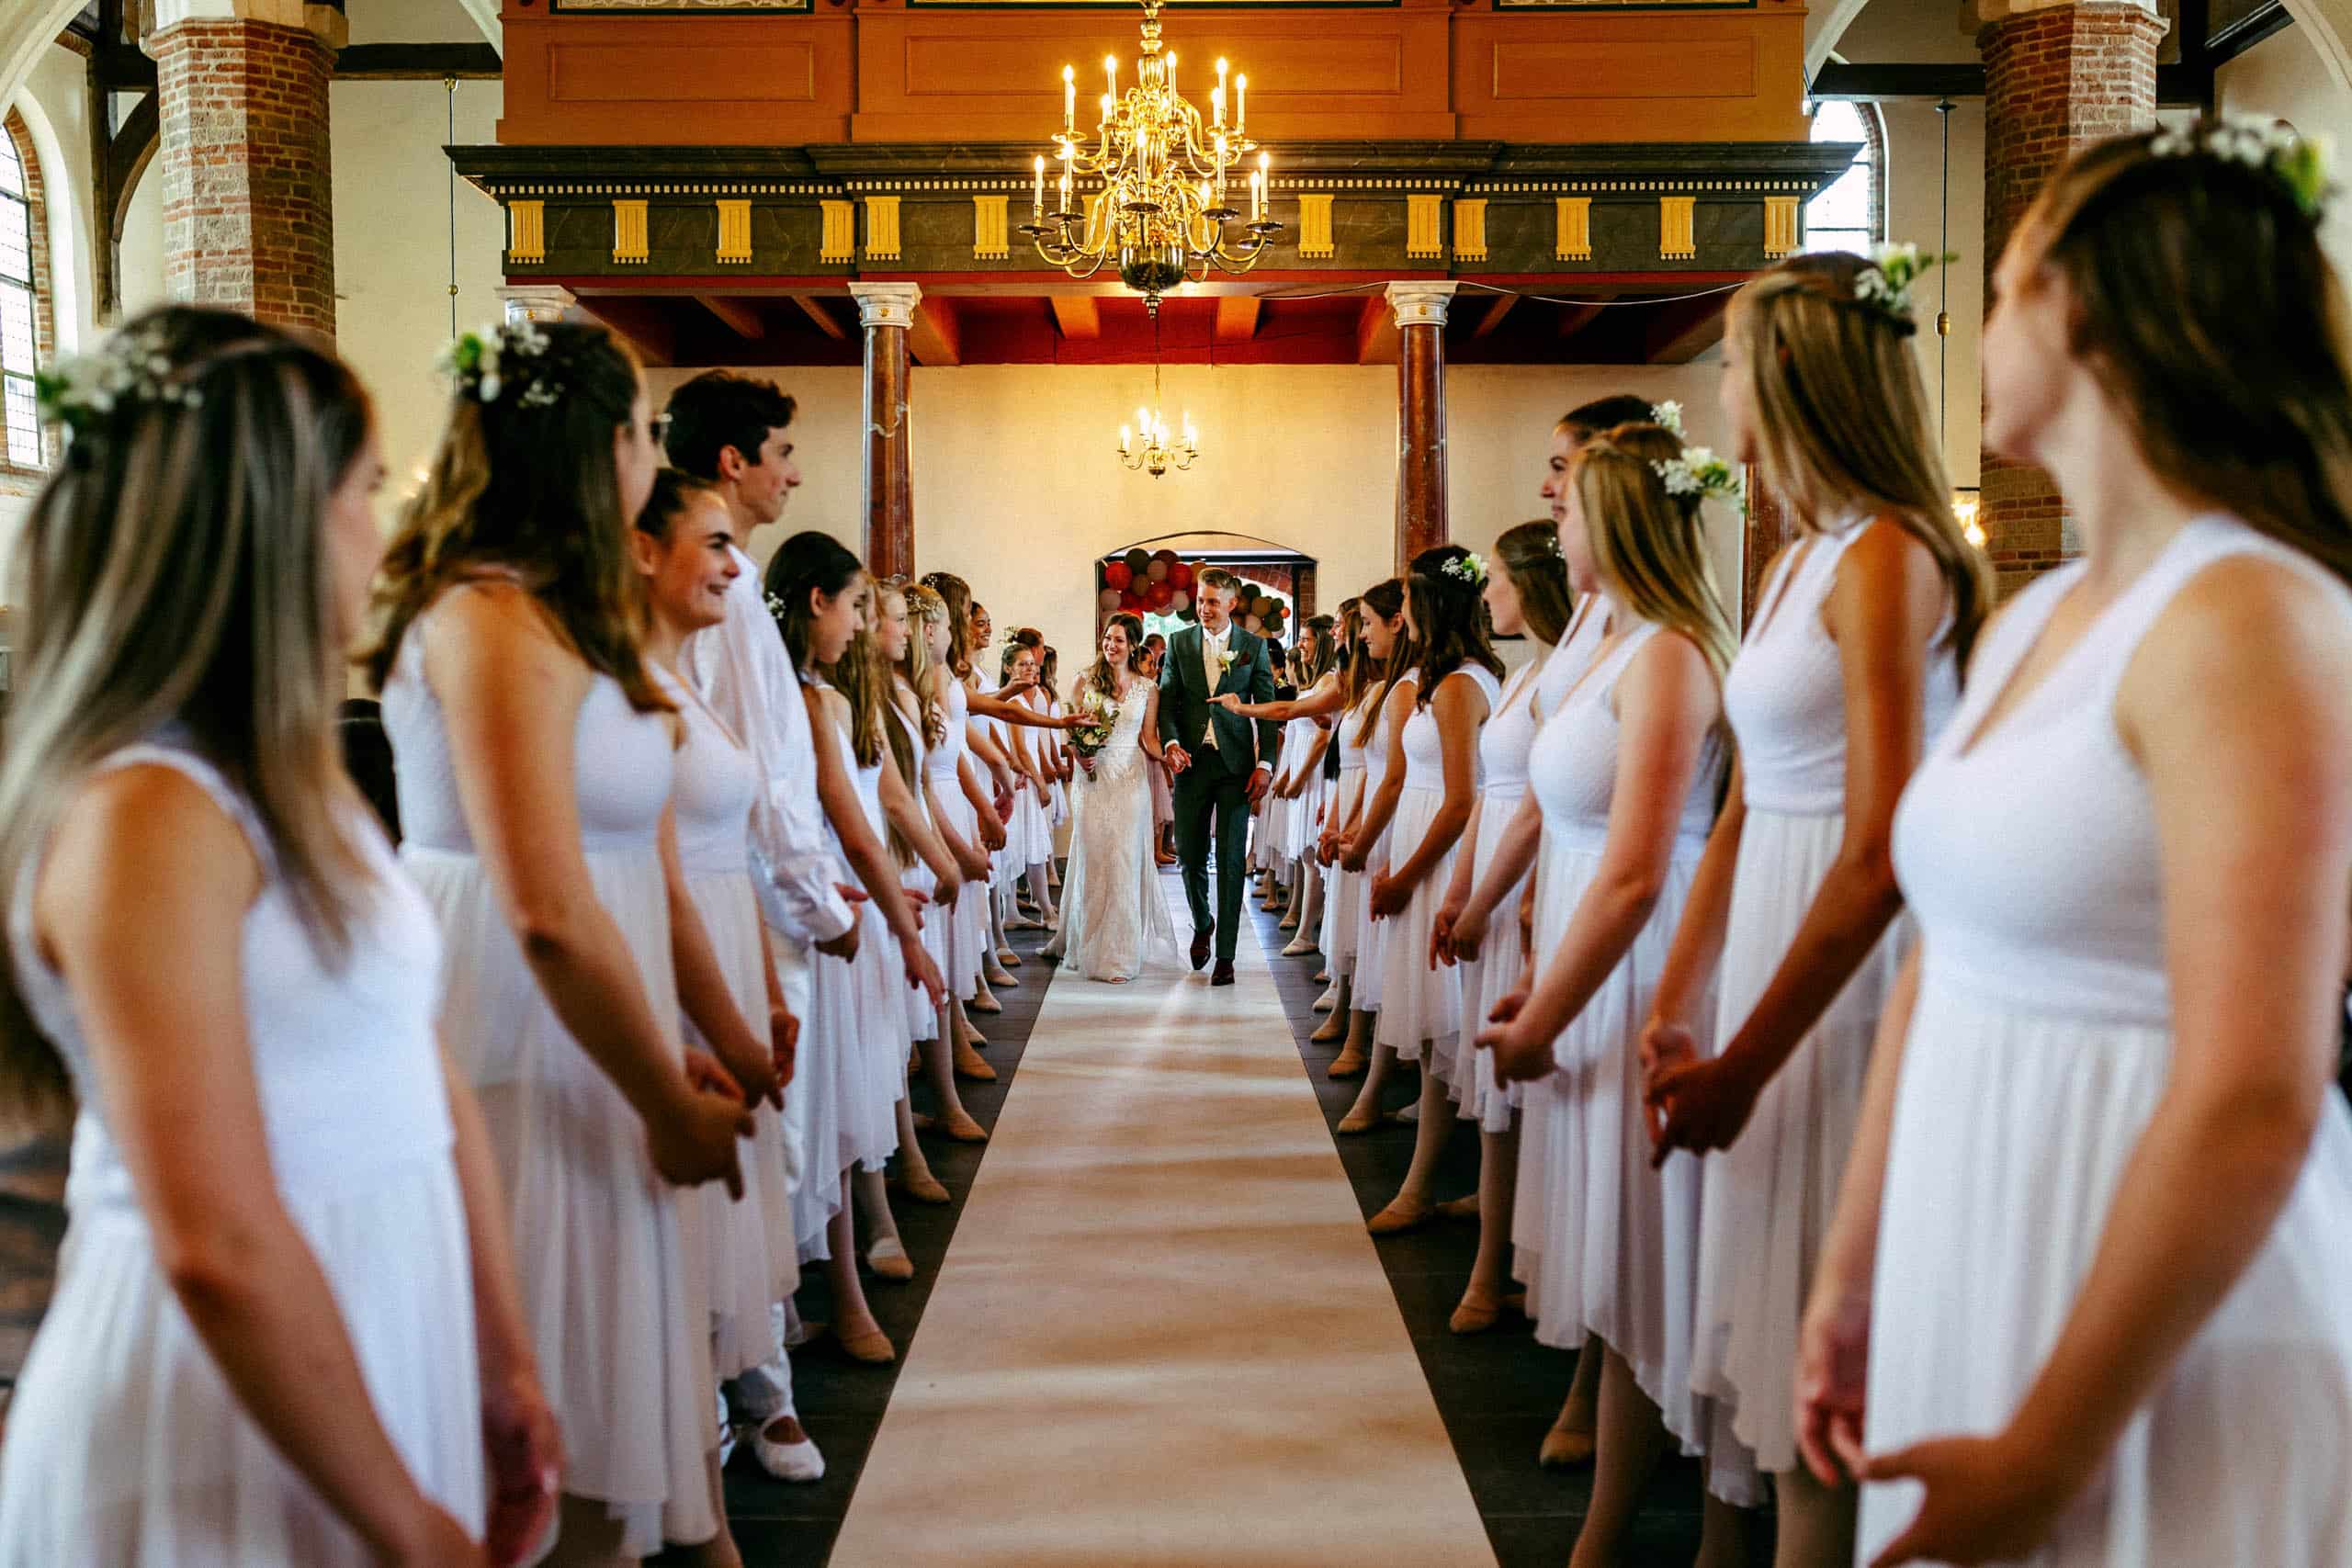 A bride and her bridesmaids, dressed in ready-to-wear attire, walk down the aisle of a church during a beautiful wedding ceremony.